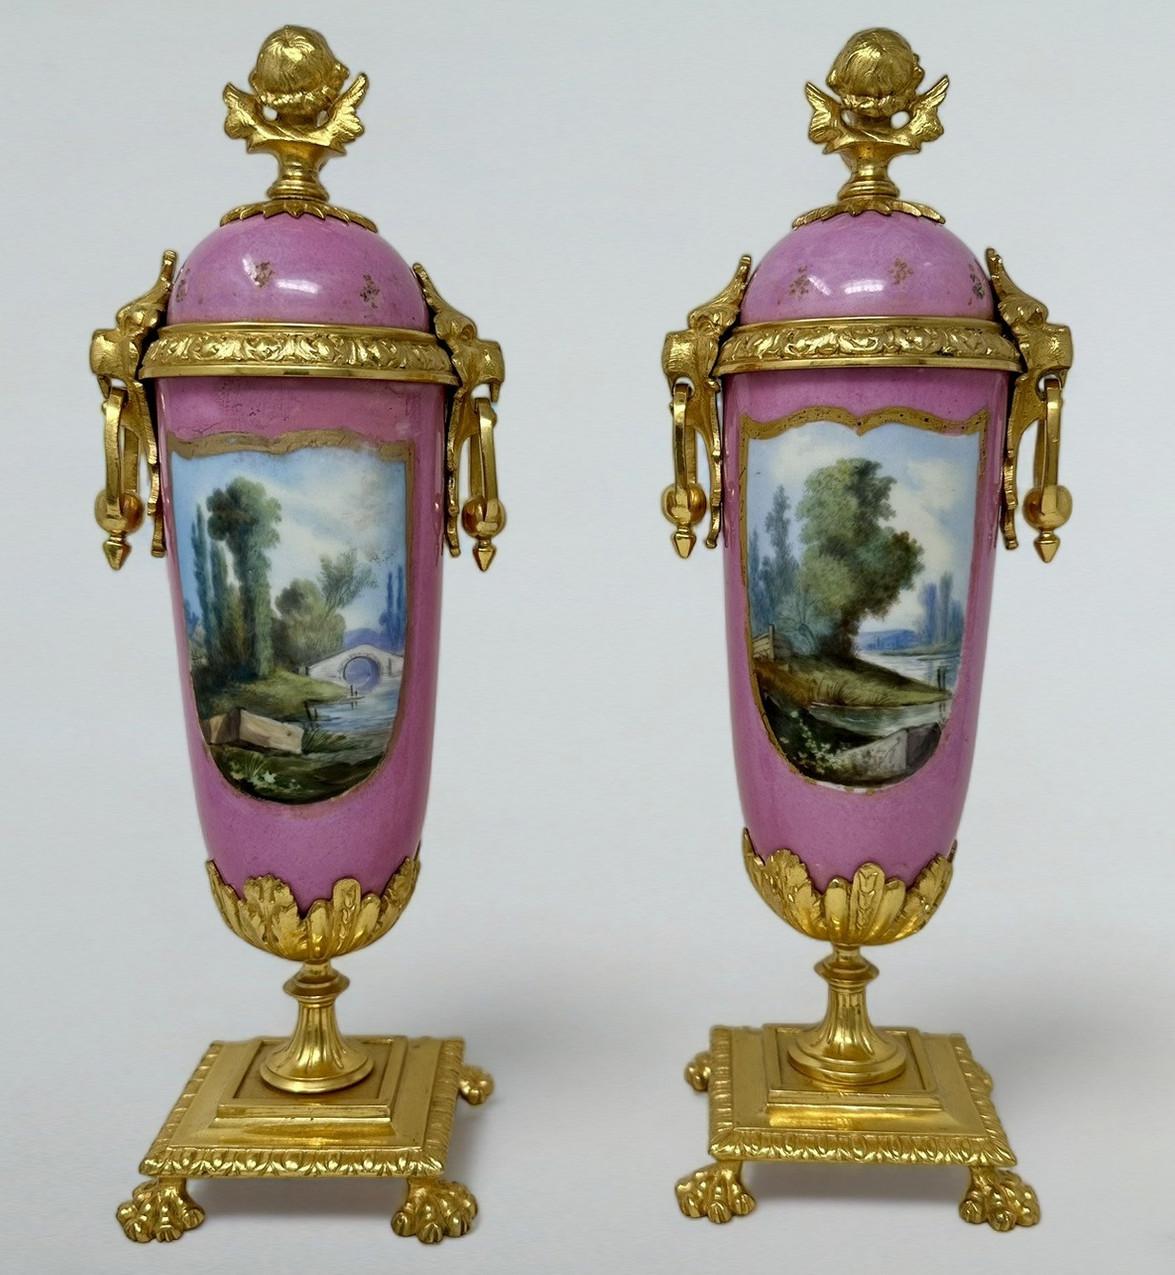 Antique Pair French Sèvres Pink Porcelain Ormolu Mounted Urns Vases Centerpiece In Good Condition For Sale In Dublin, Ireland